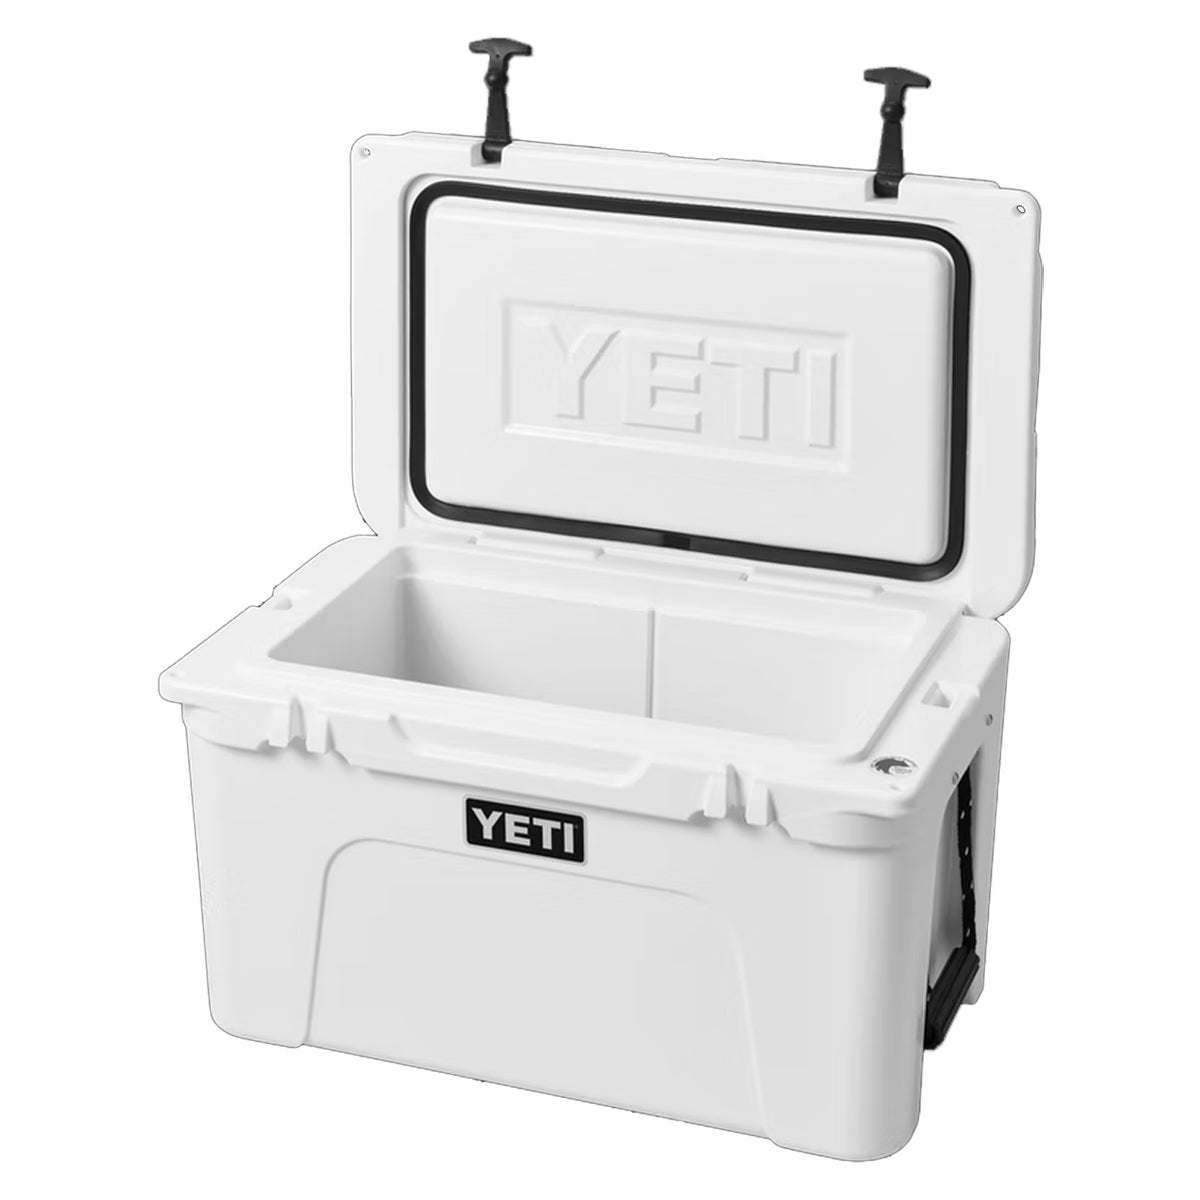 Shop for YETI Tundra 45 Cooler